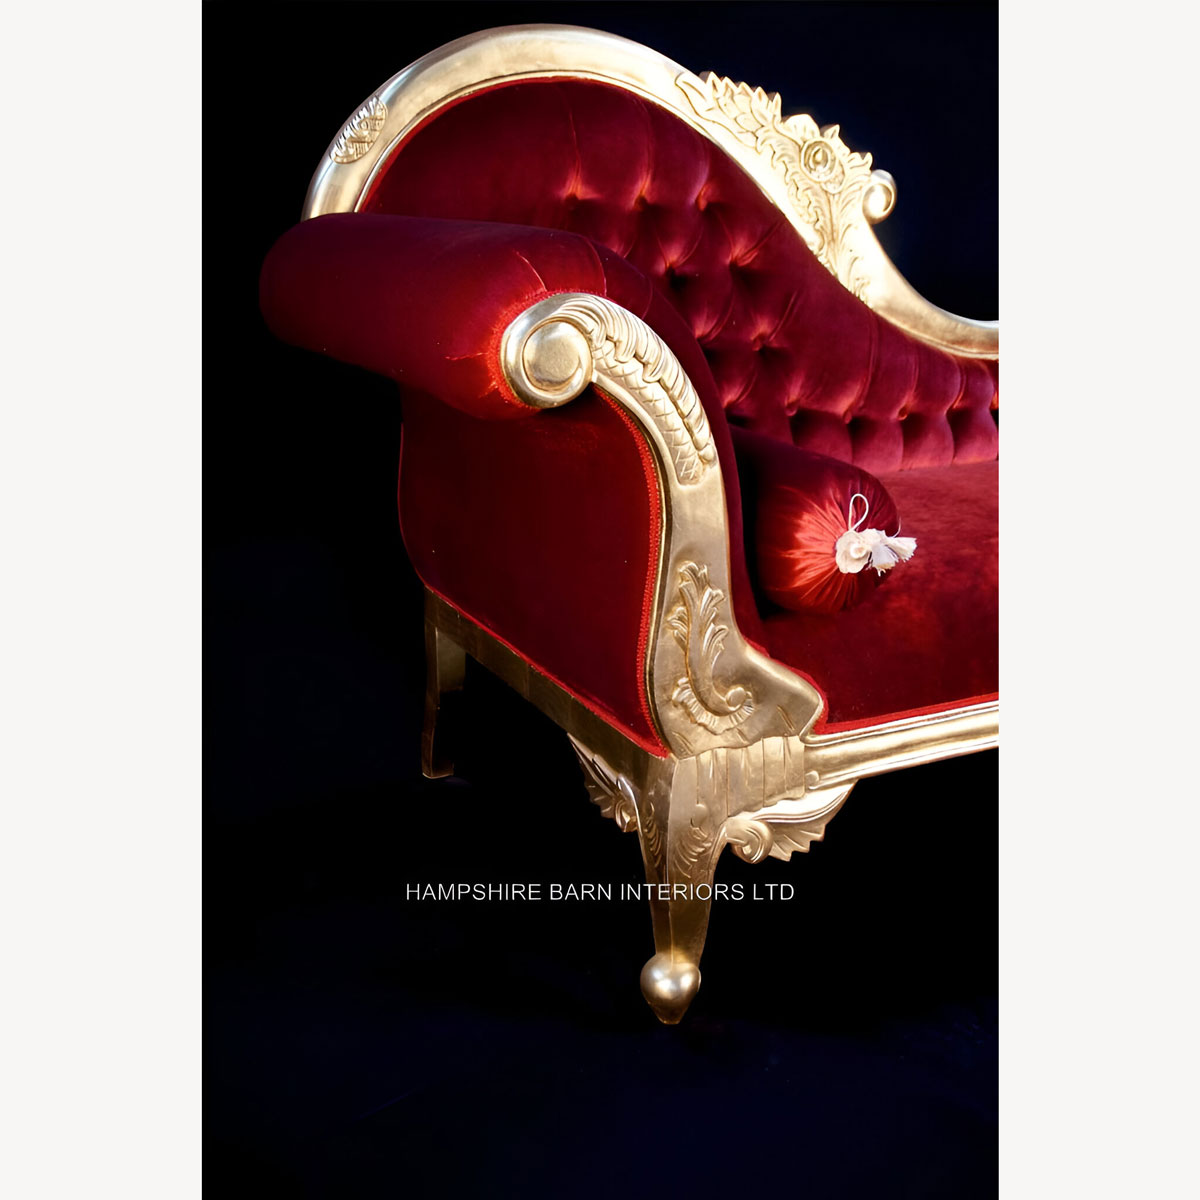 Beautiful Large Gold Leaf Red Velvet Hampshire Chaise Longue Stunning 5 - Hampshire Barn Interiors - Beautiful Large Gold Leaf & Red Velvet Hampshire Chaise Longue Stunning -